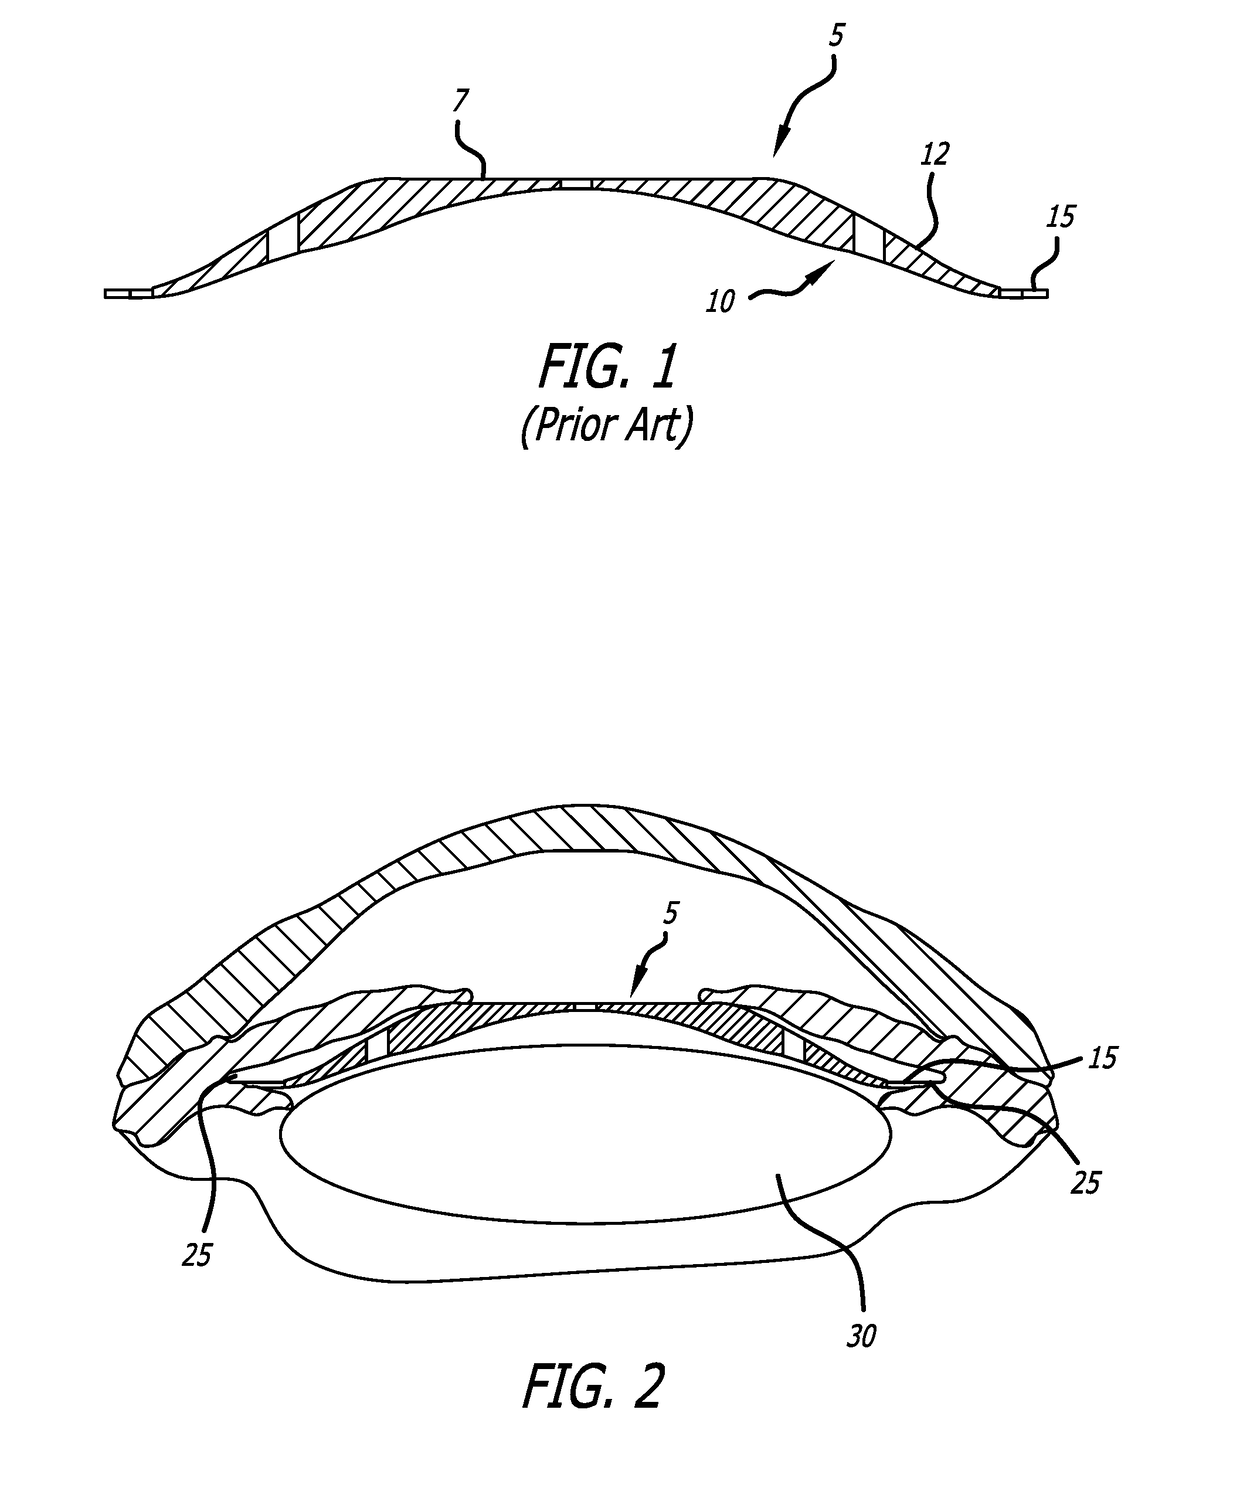 Controlled axial displacement posterior chamber phakic intraocular lens